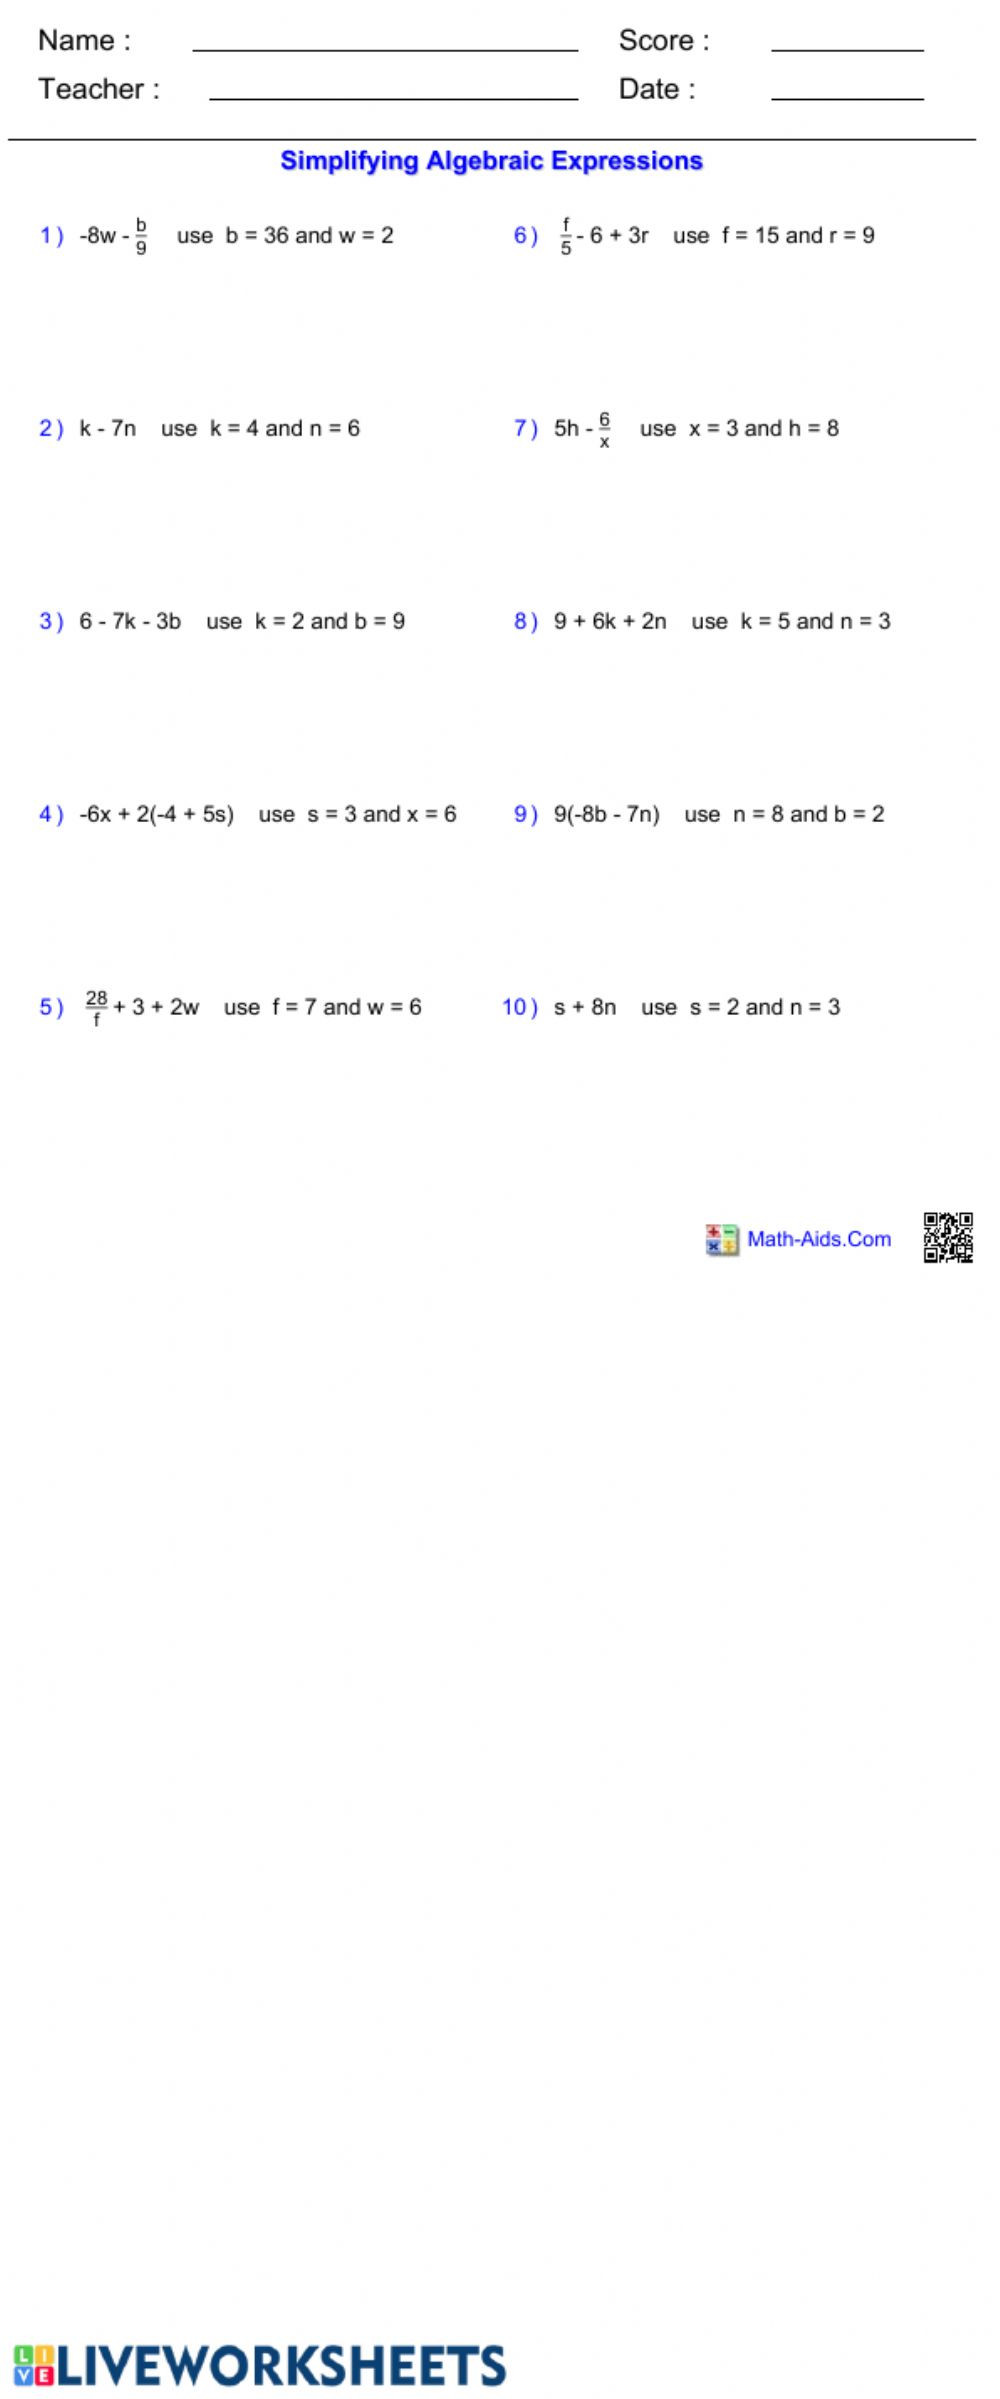 Simplify Exponential Expressions Worksheet Simplifying Algebraic Expressions Interactive Worksheet